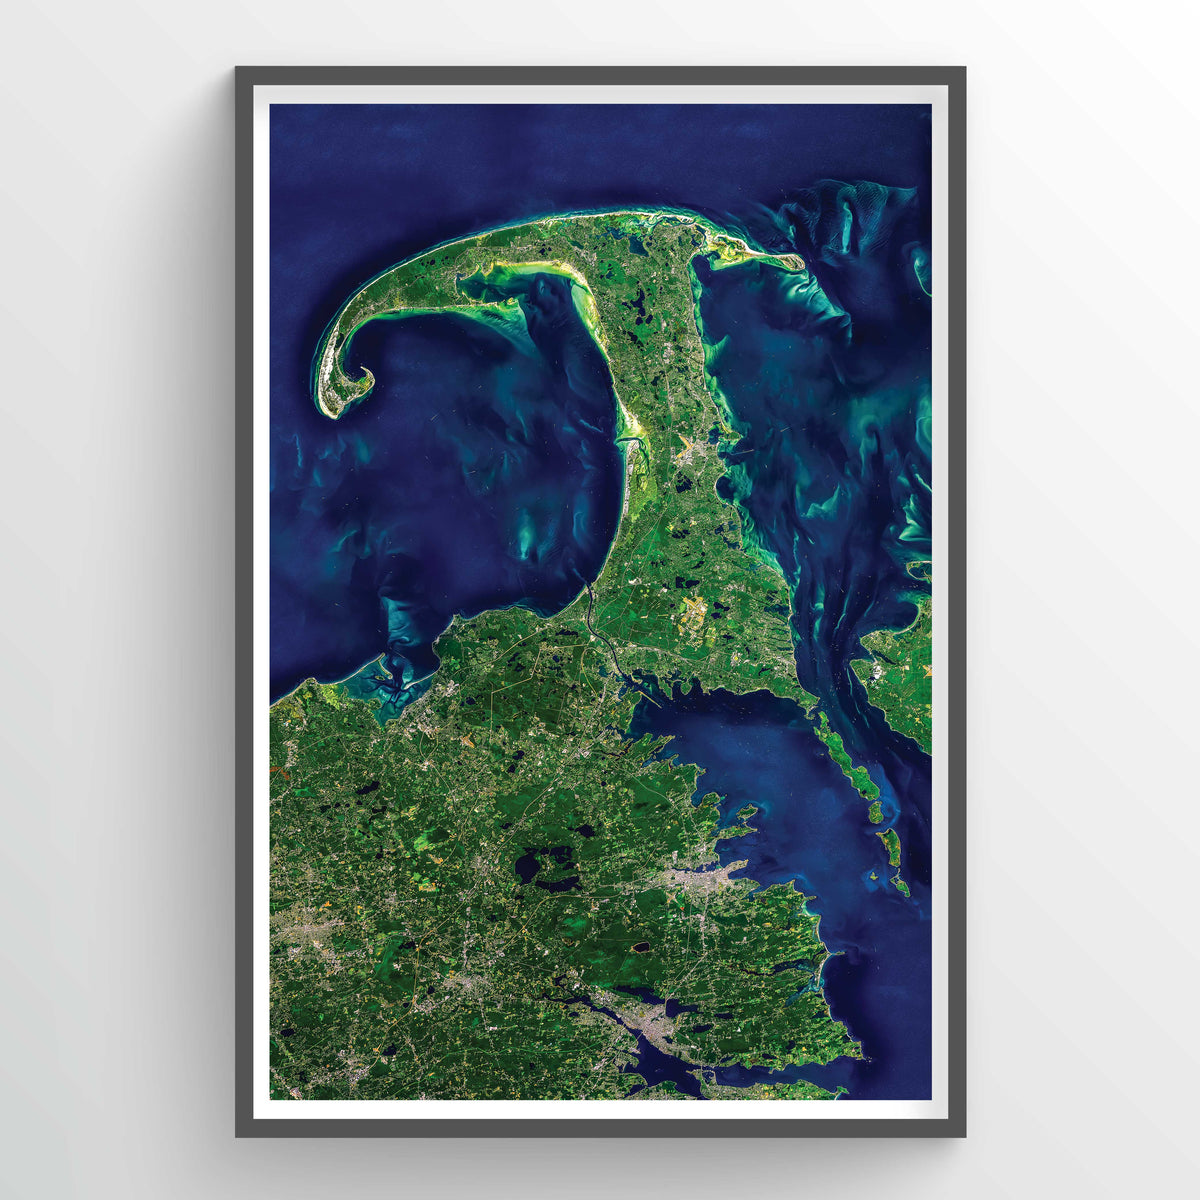 Cape Cod Earth Photography -Art Print - Point Two Design